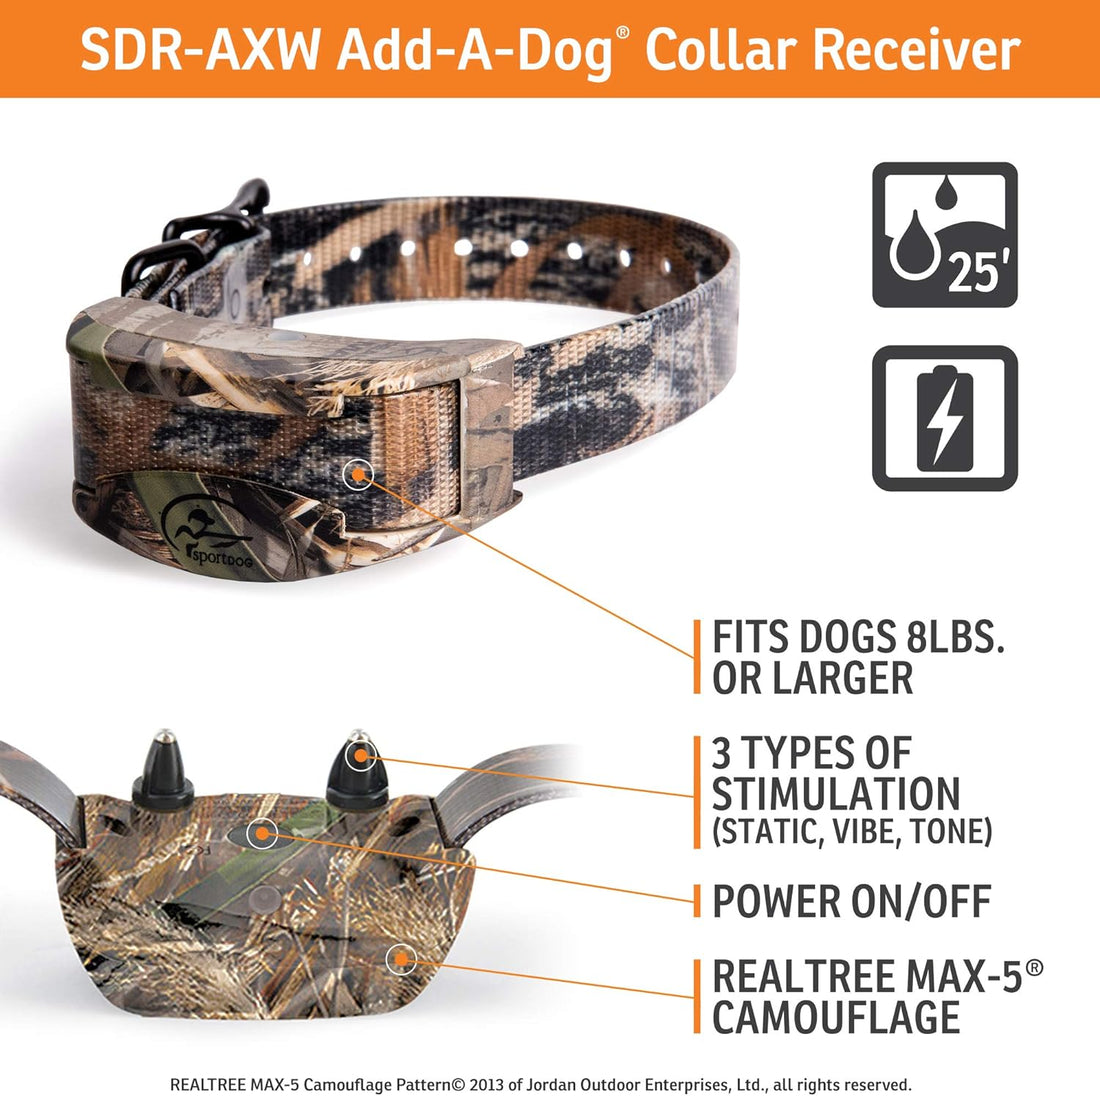 SportDOG Brand WetlandHunter 1825X Add-A-Dog Collar - Additional, or Extra Collar for Your Remote Trainer - Waterproof and Rechargeable with Tone, Vibration, and Static